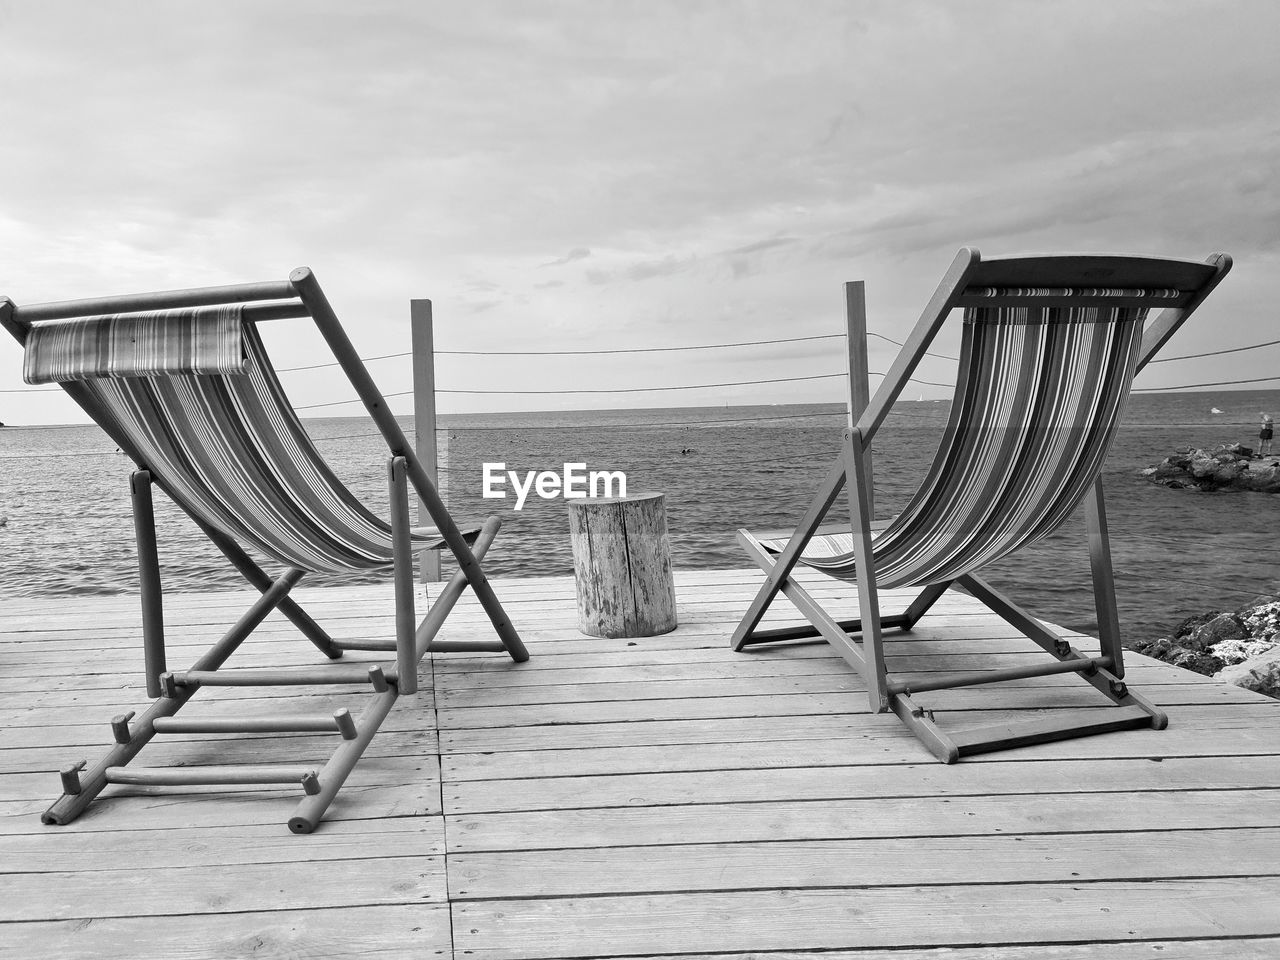 water, sky, beach, sea, land, chair, nature, black and white, tranquility, wood, seat, tranquil scene, cloud, beauty in nature, monochrome photography, scenics - nature, relaxation, absence, no people, sand, horizon, horizon over water, day, empty, holiday, monochrome, summer, white, deck chair, outdoors, sitting, vacation, trip, travel destinations, idyllic, pier, architecture, sunlight, furniture